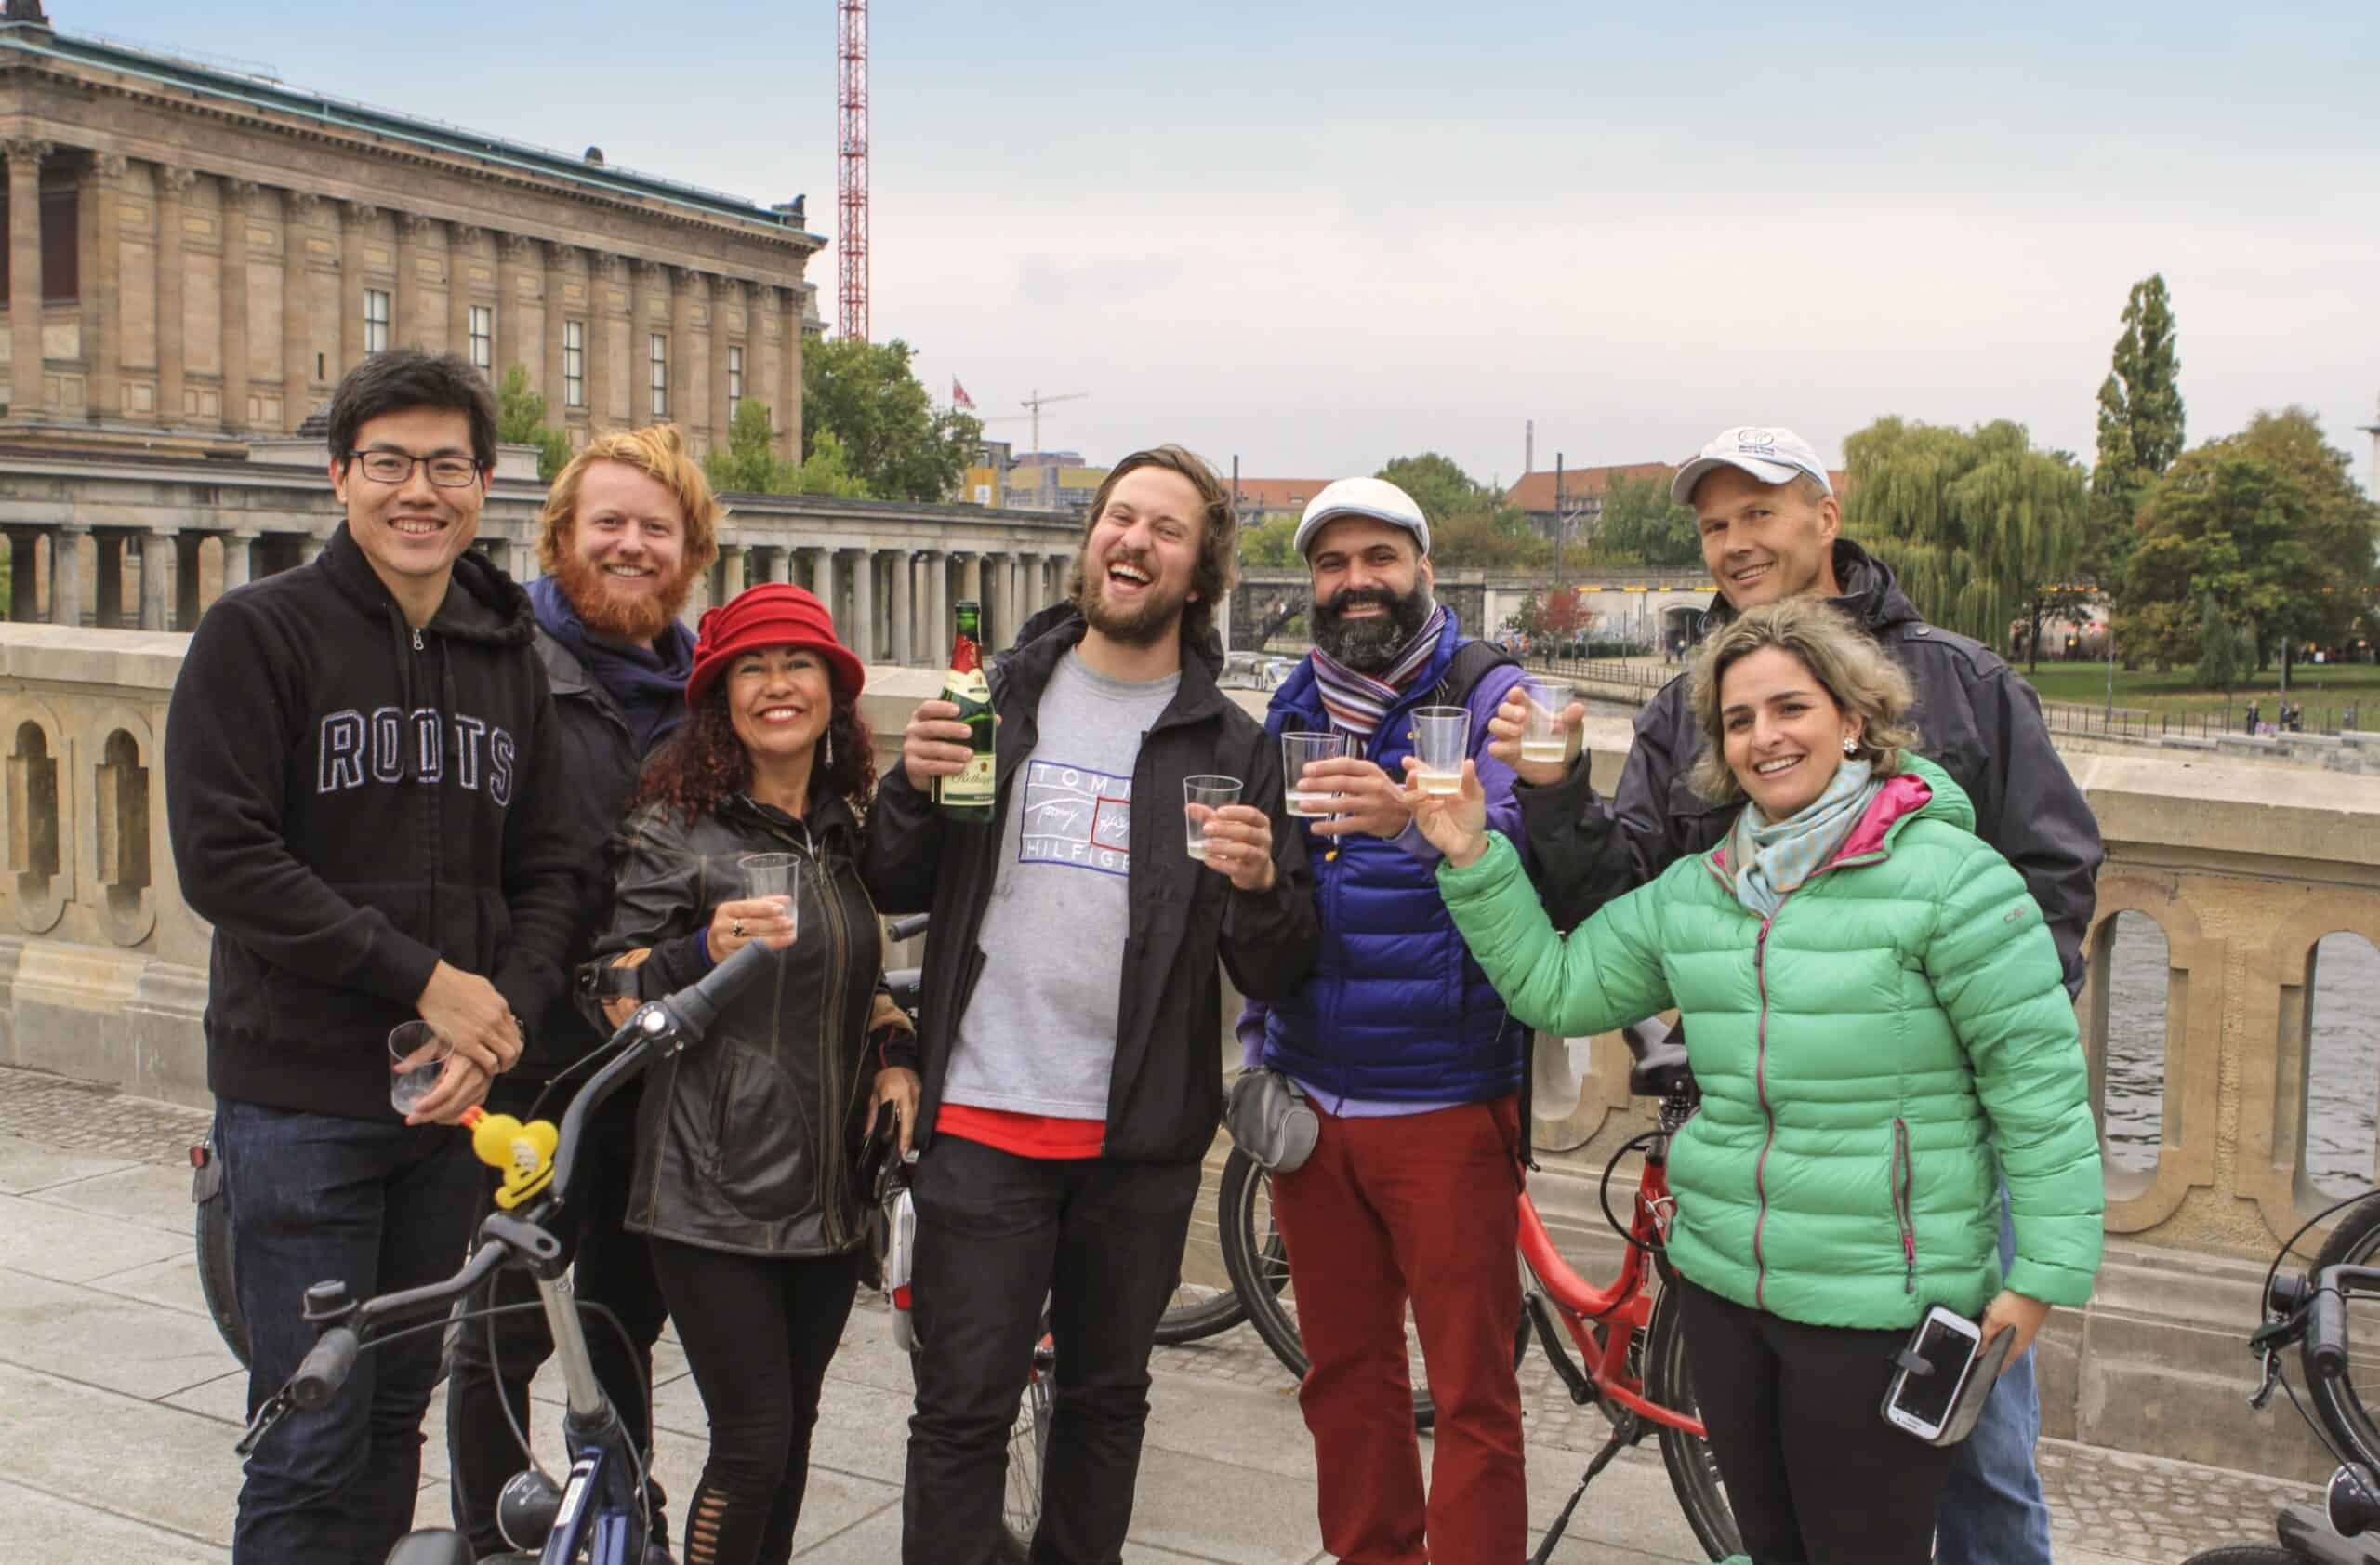 A group cheers their drinks on a bridge in Berlin, Germany